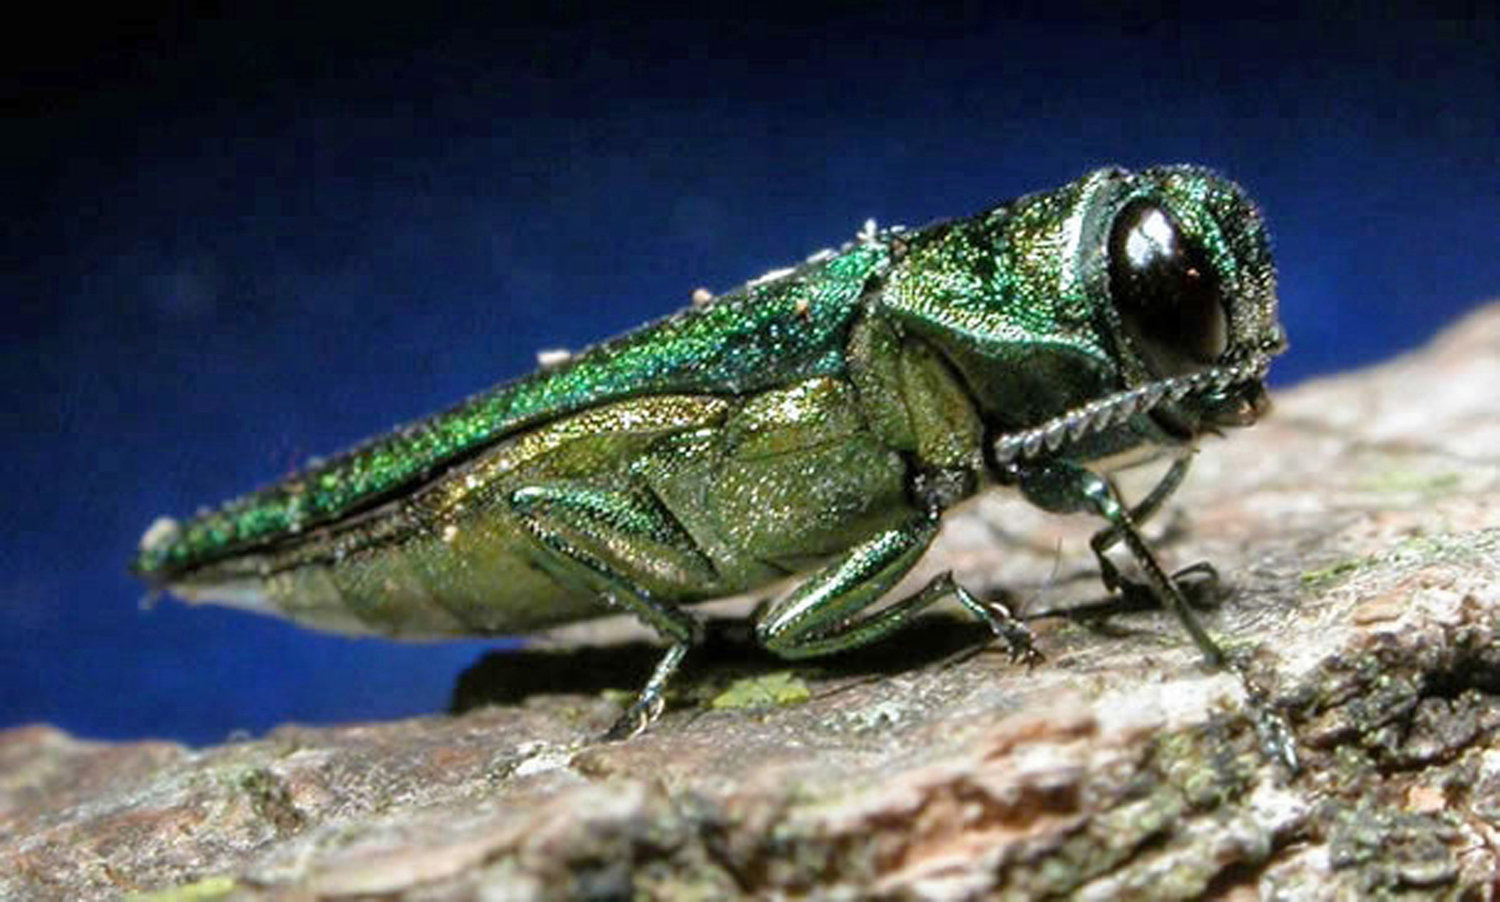 In an undated photo provided by the Minnesota Department of Natural Resources, an adult emerald ash borer is shown. The highly destructive insects which kill ash trees are metallic green and about 1/2-inch long. (AP Photo/Minnesota Department of Natural Resources)